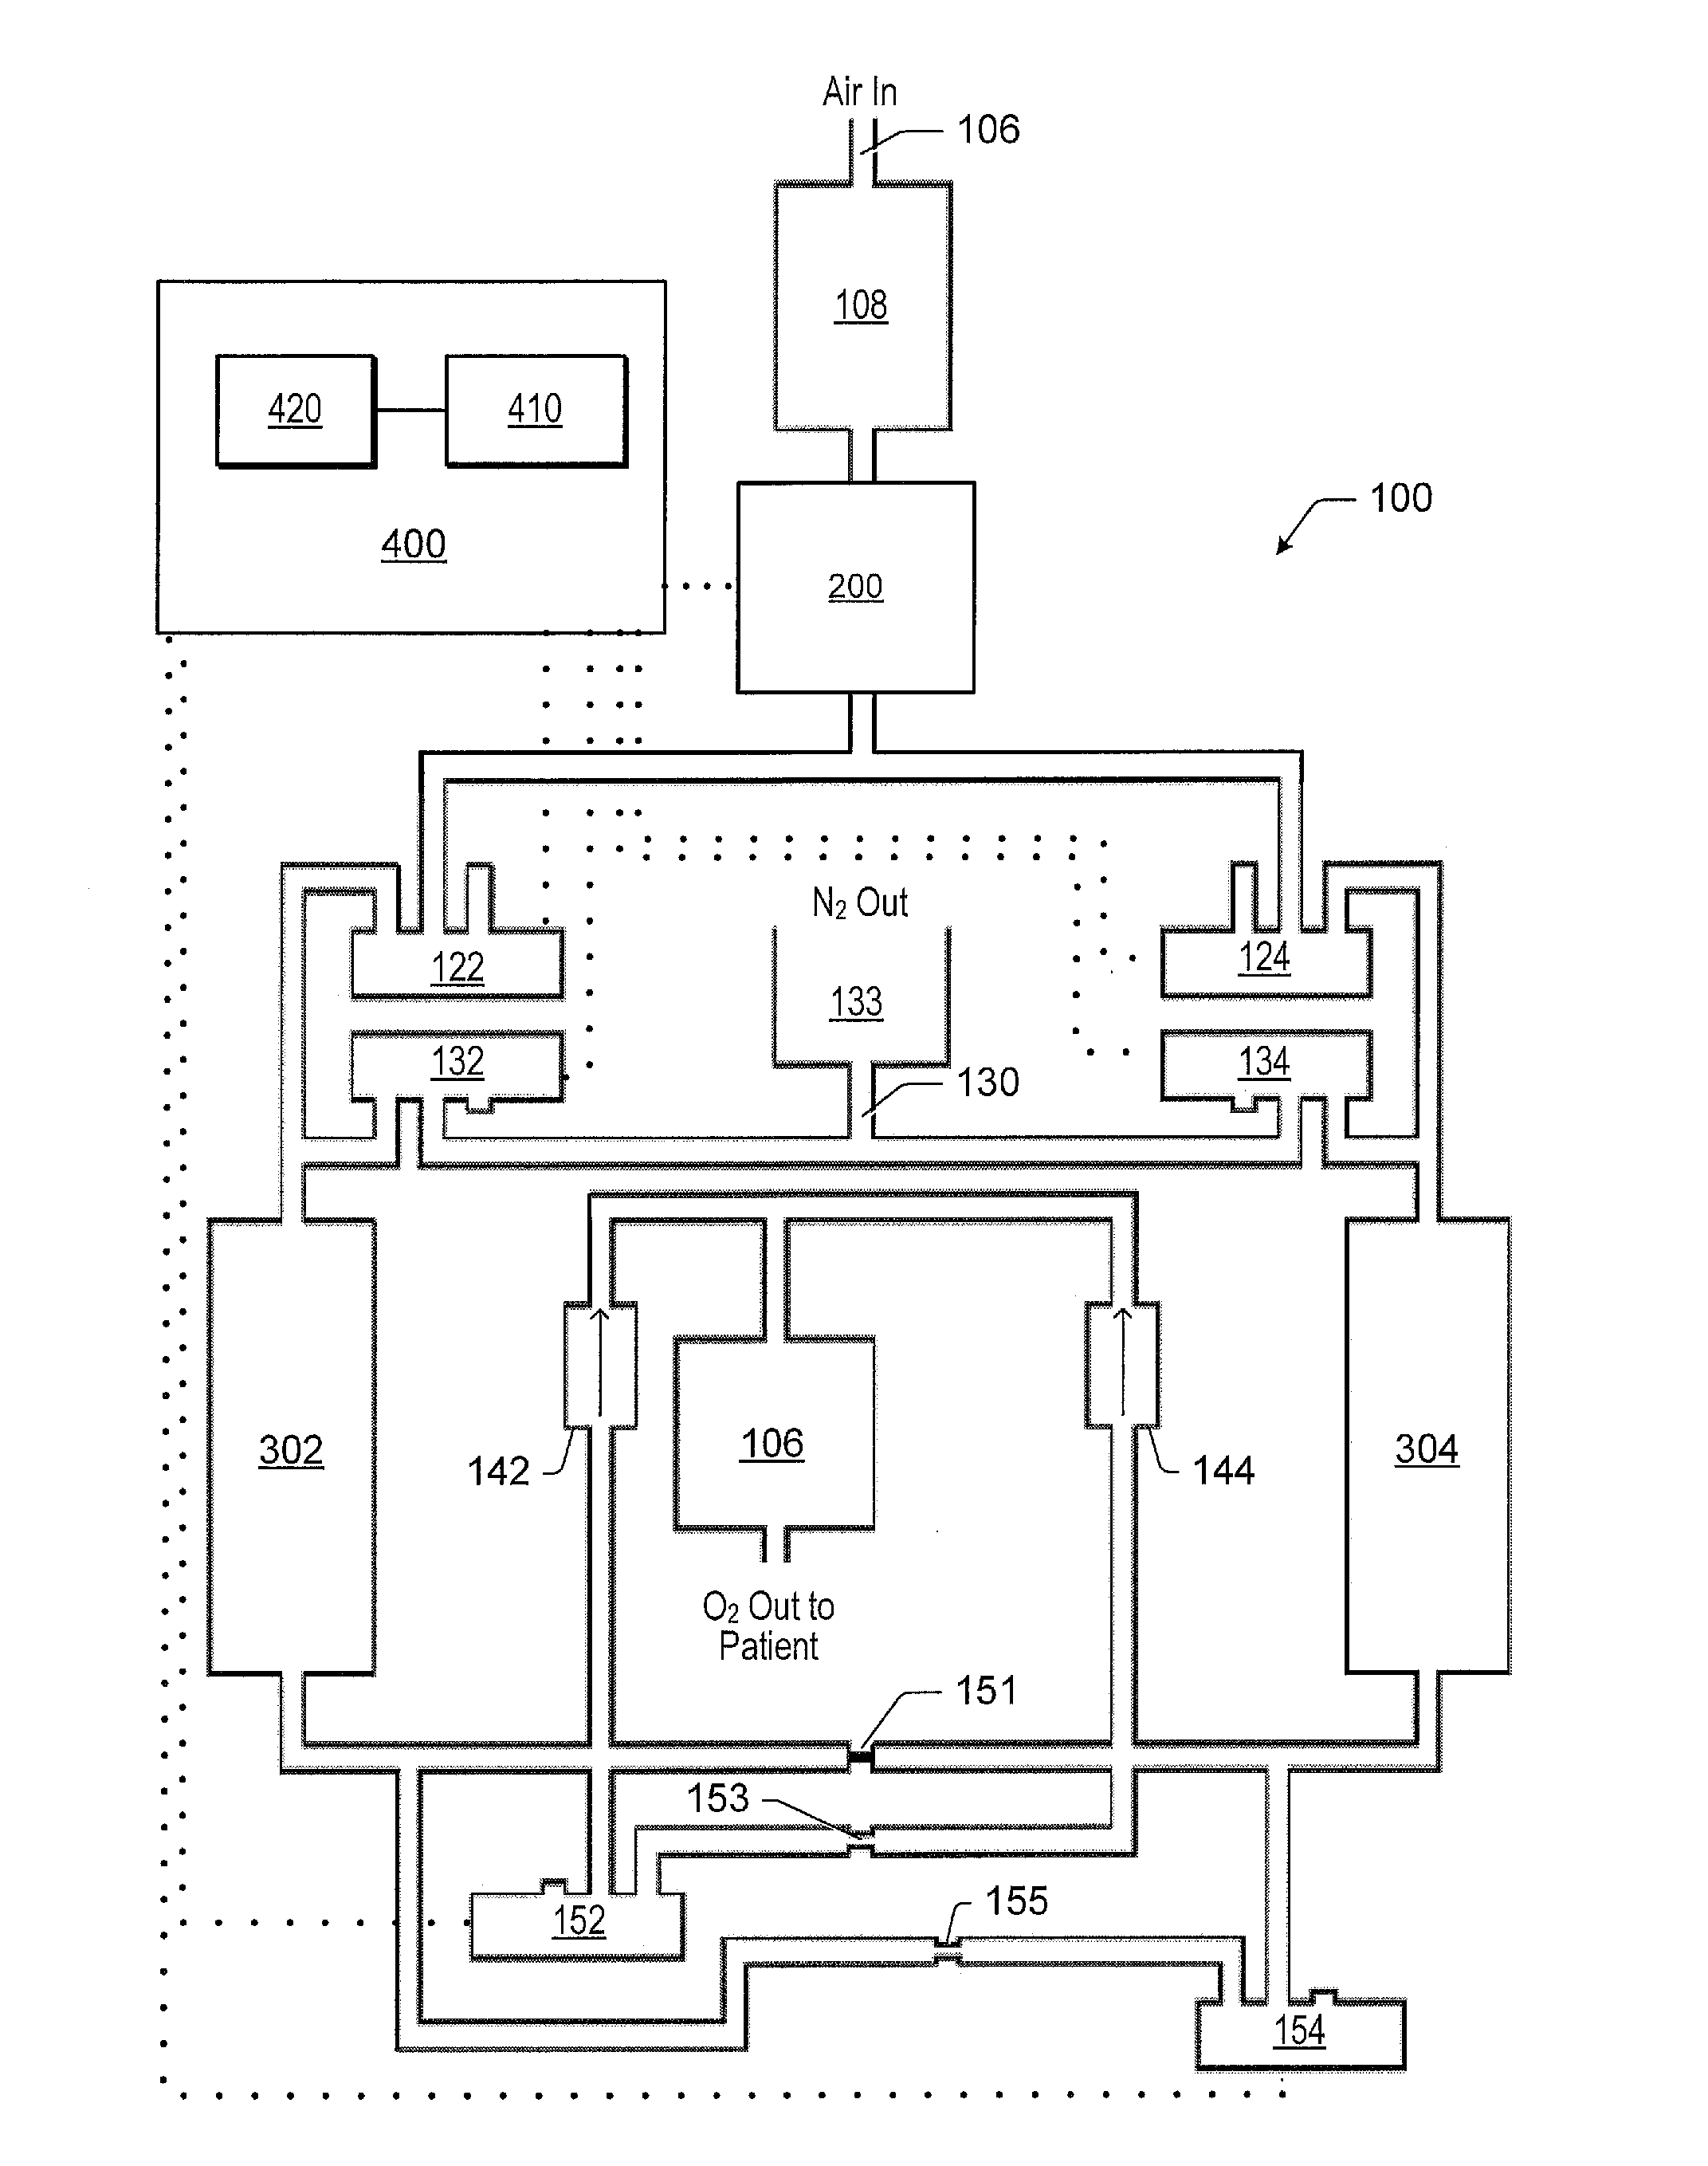 Oxygen concentrator system and methods for oral delivery of oxygen enriched gas